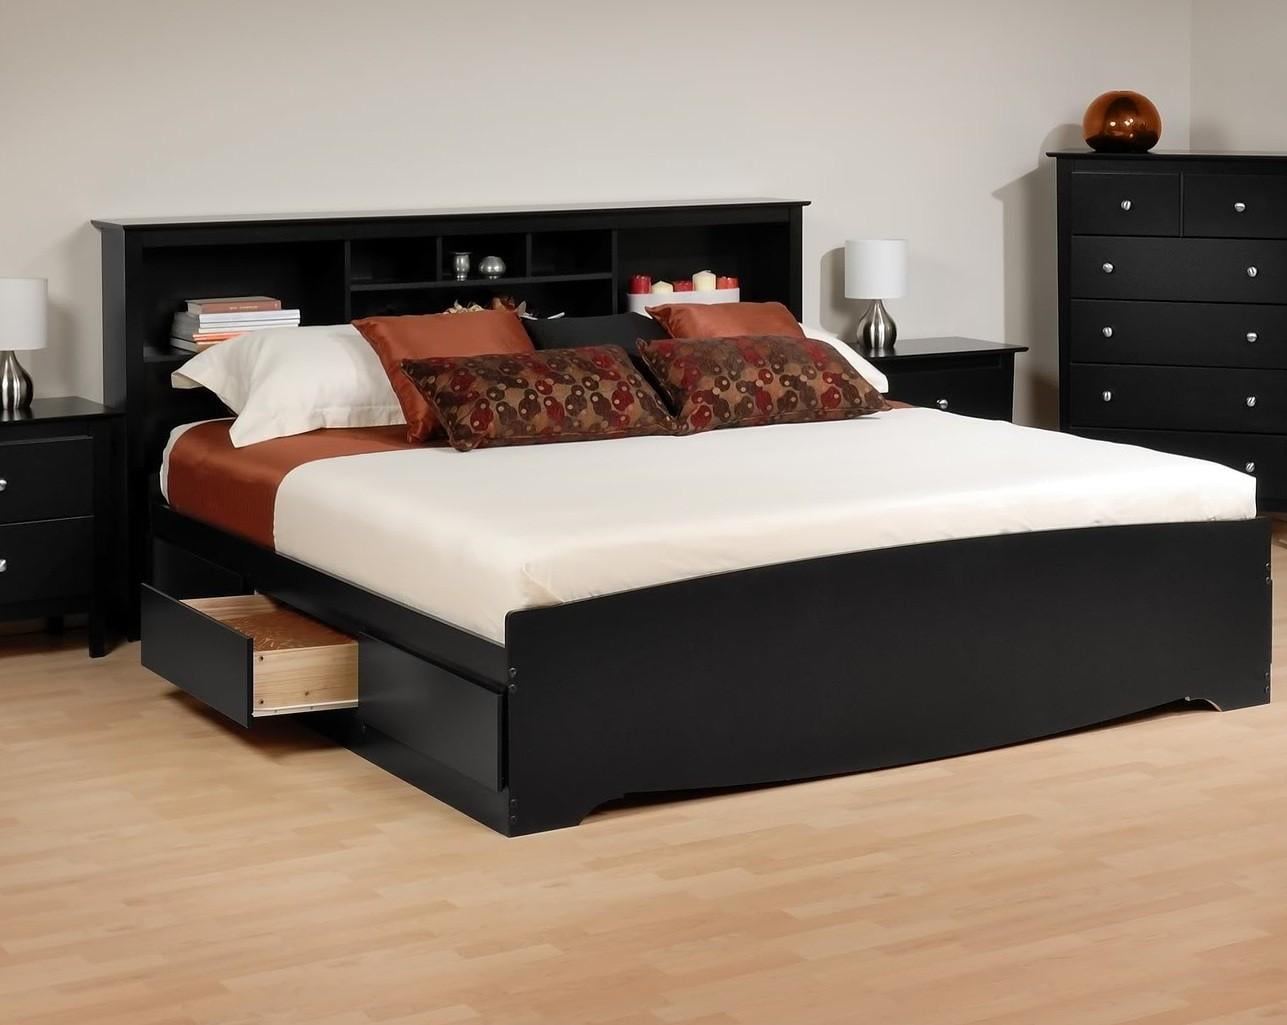 Bookcase Headboard Bed Size King, King Size Bed With Storage Headboard